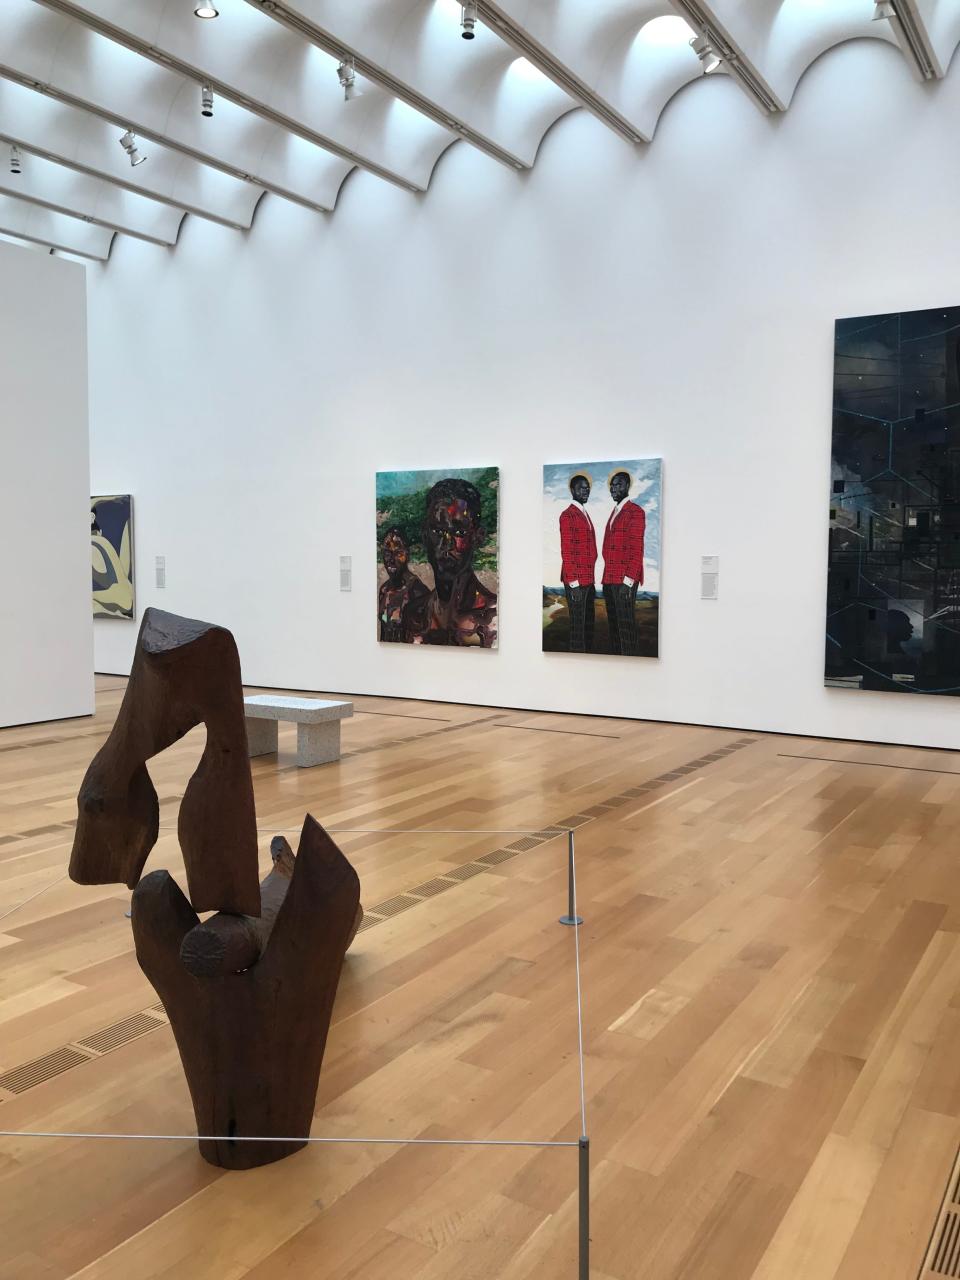 Ludovic Nkoth's "Oasis" hangs in this gallery at the High Museum in Atlanta.